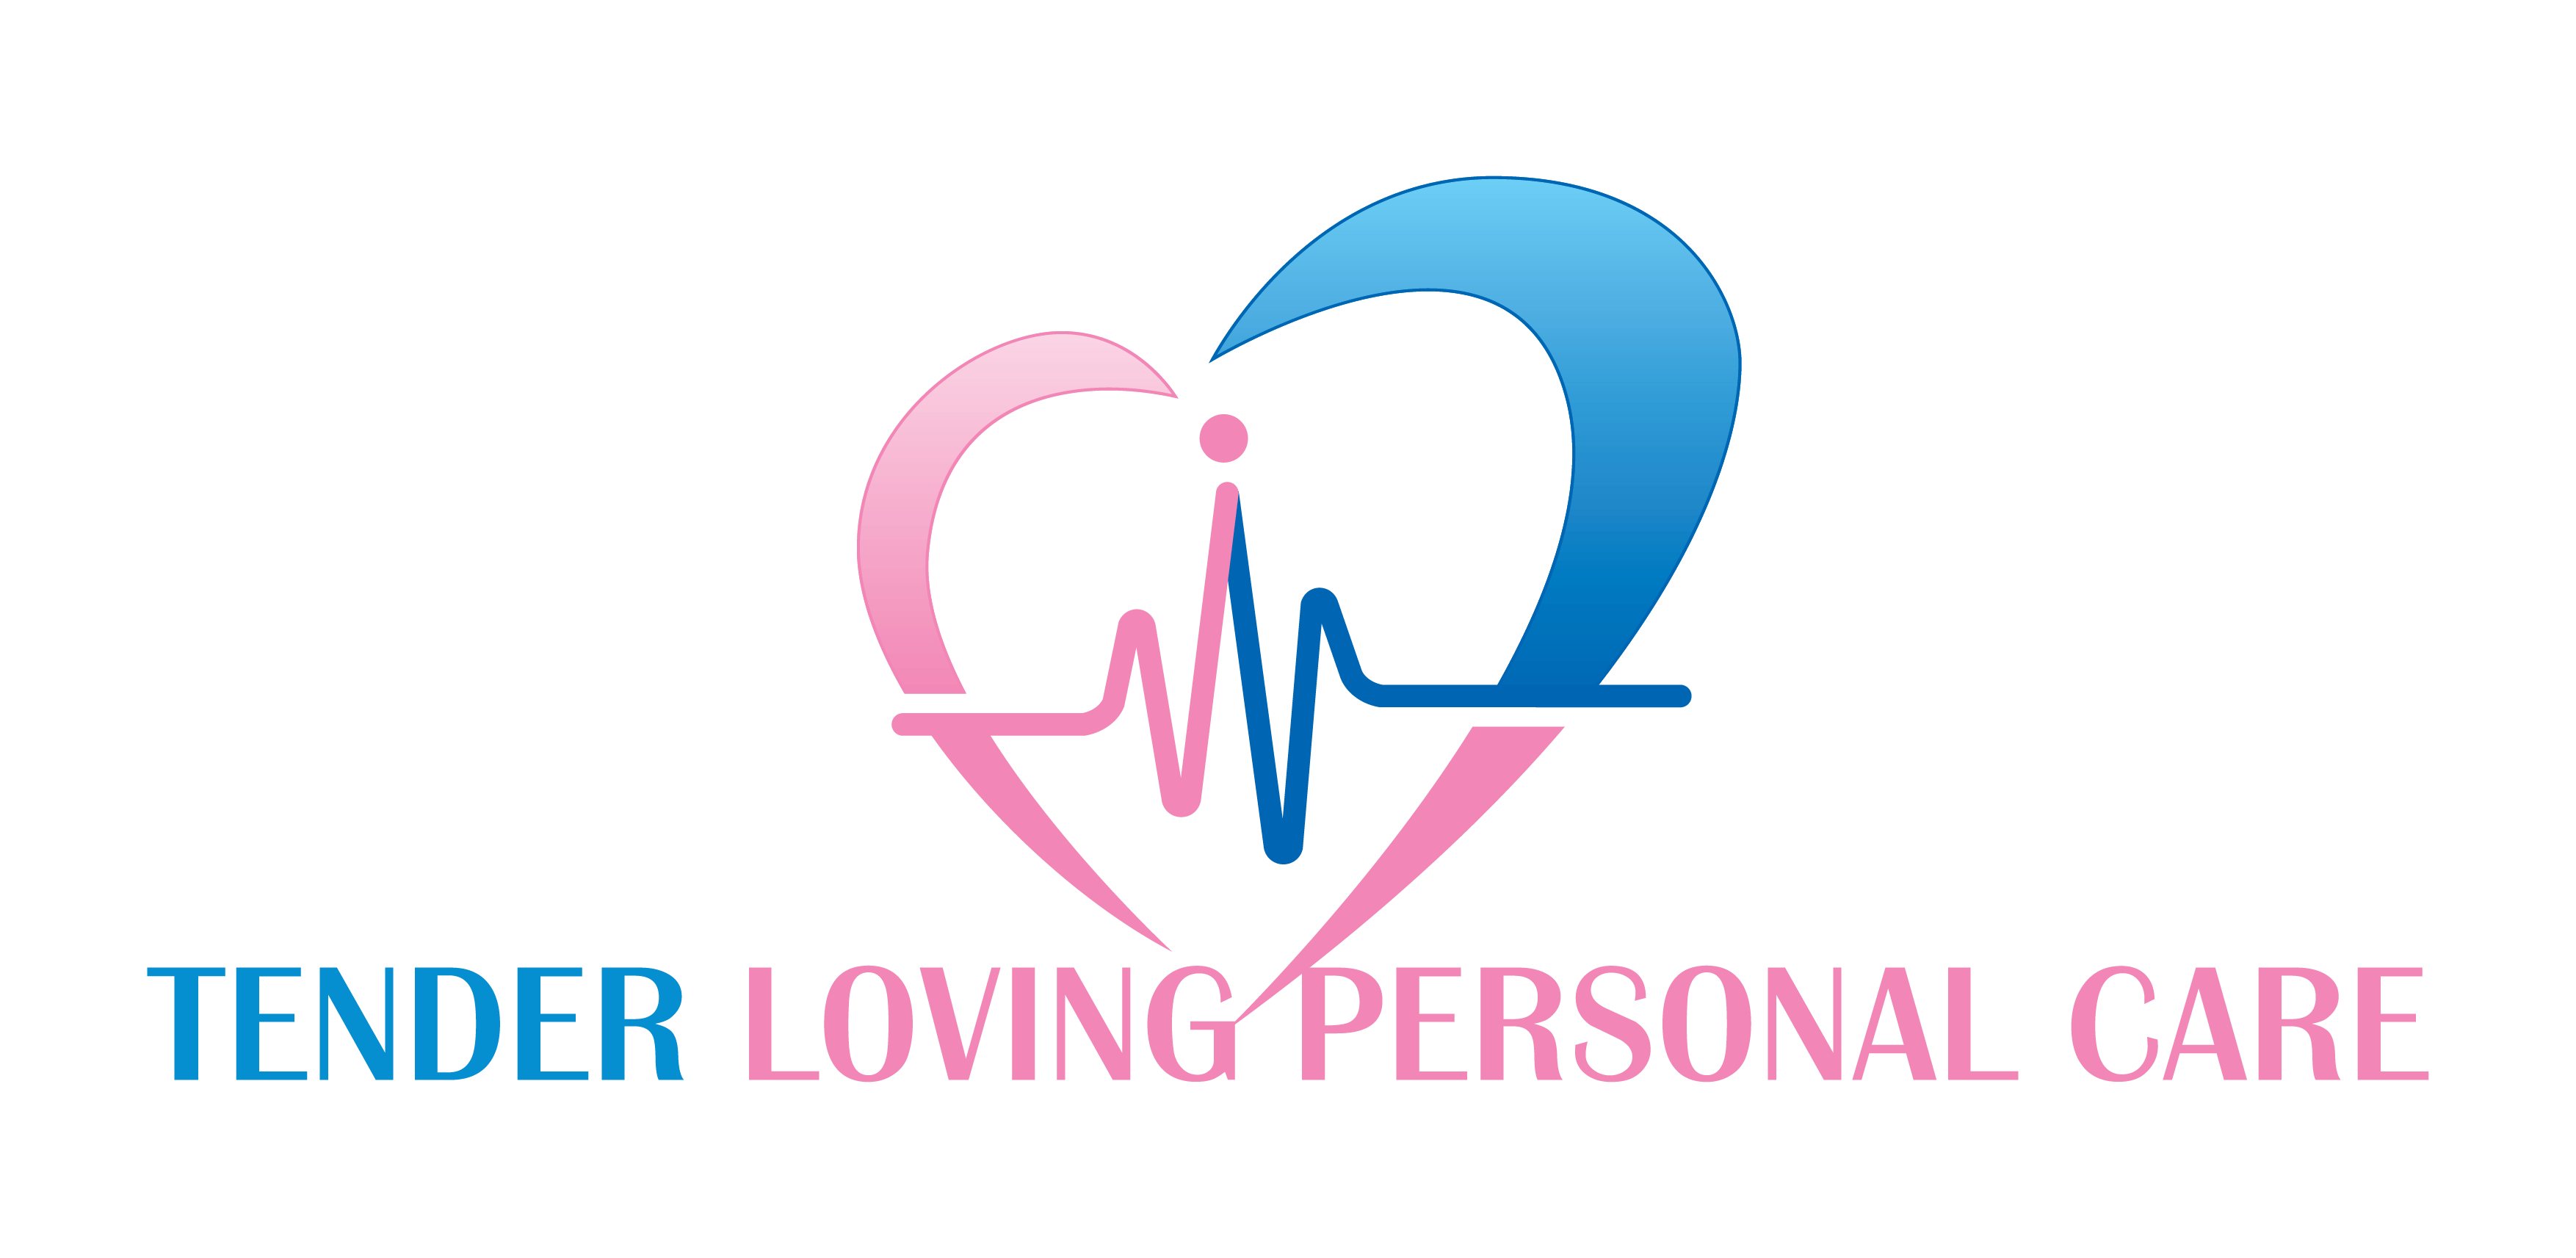 Personal Care Aide Logo - Caregivers. Home Health Aide (HHA). Personal Care Attendant